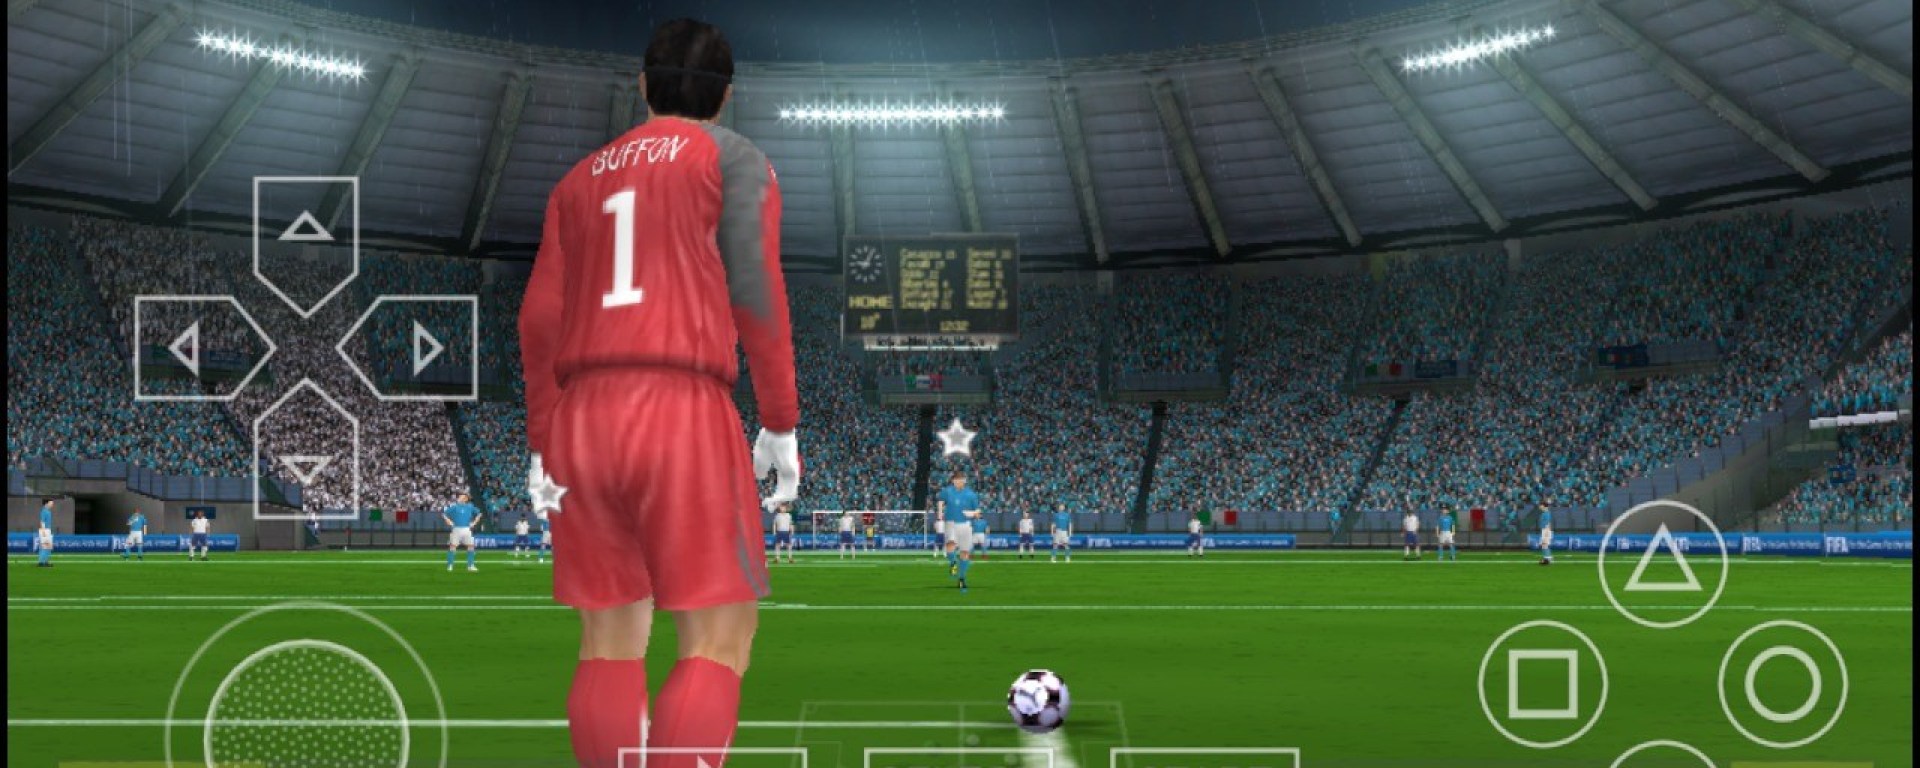 Fifa 2018 Iso Apk For Ppsspp Android Device Soccer Game